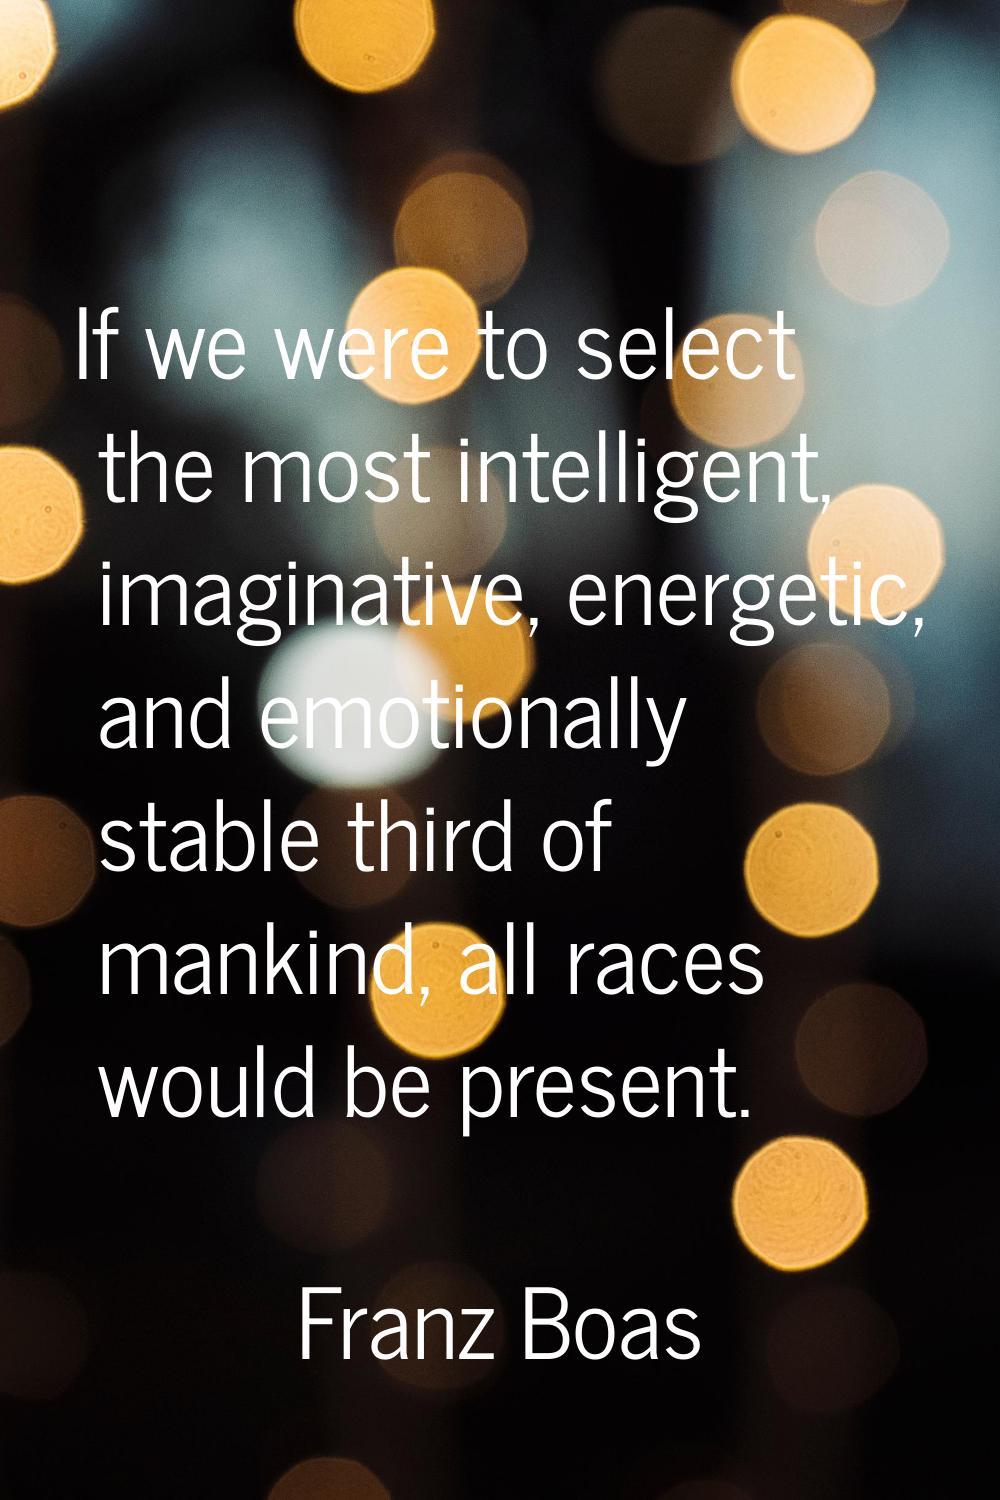 If we were to select the most intelligent, imaginative, energetic, and emotionally stable third of 